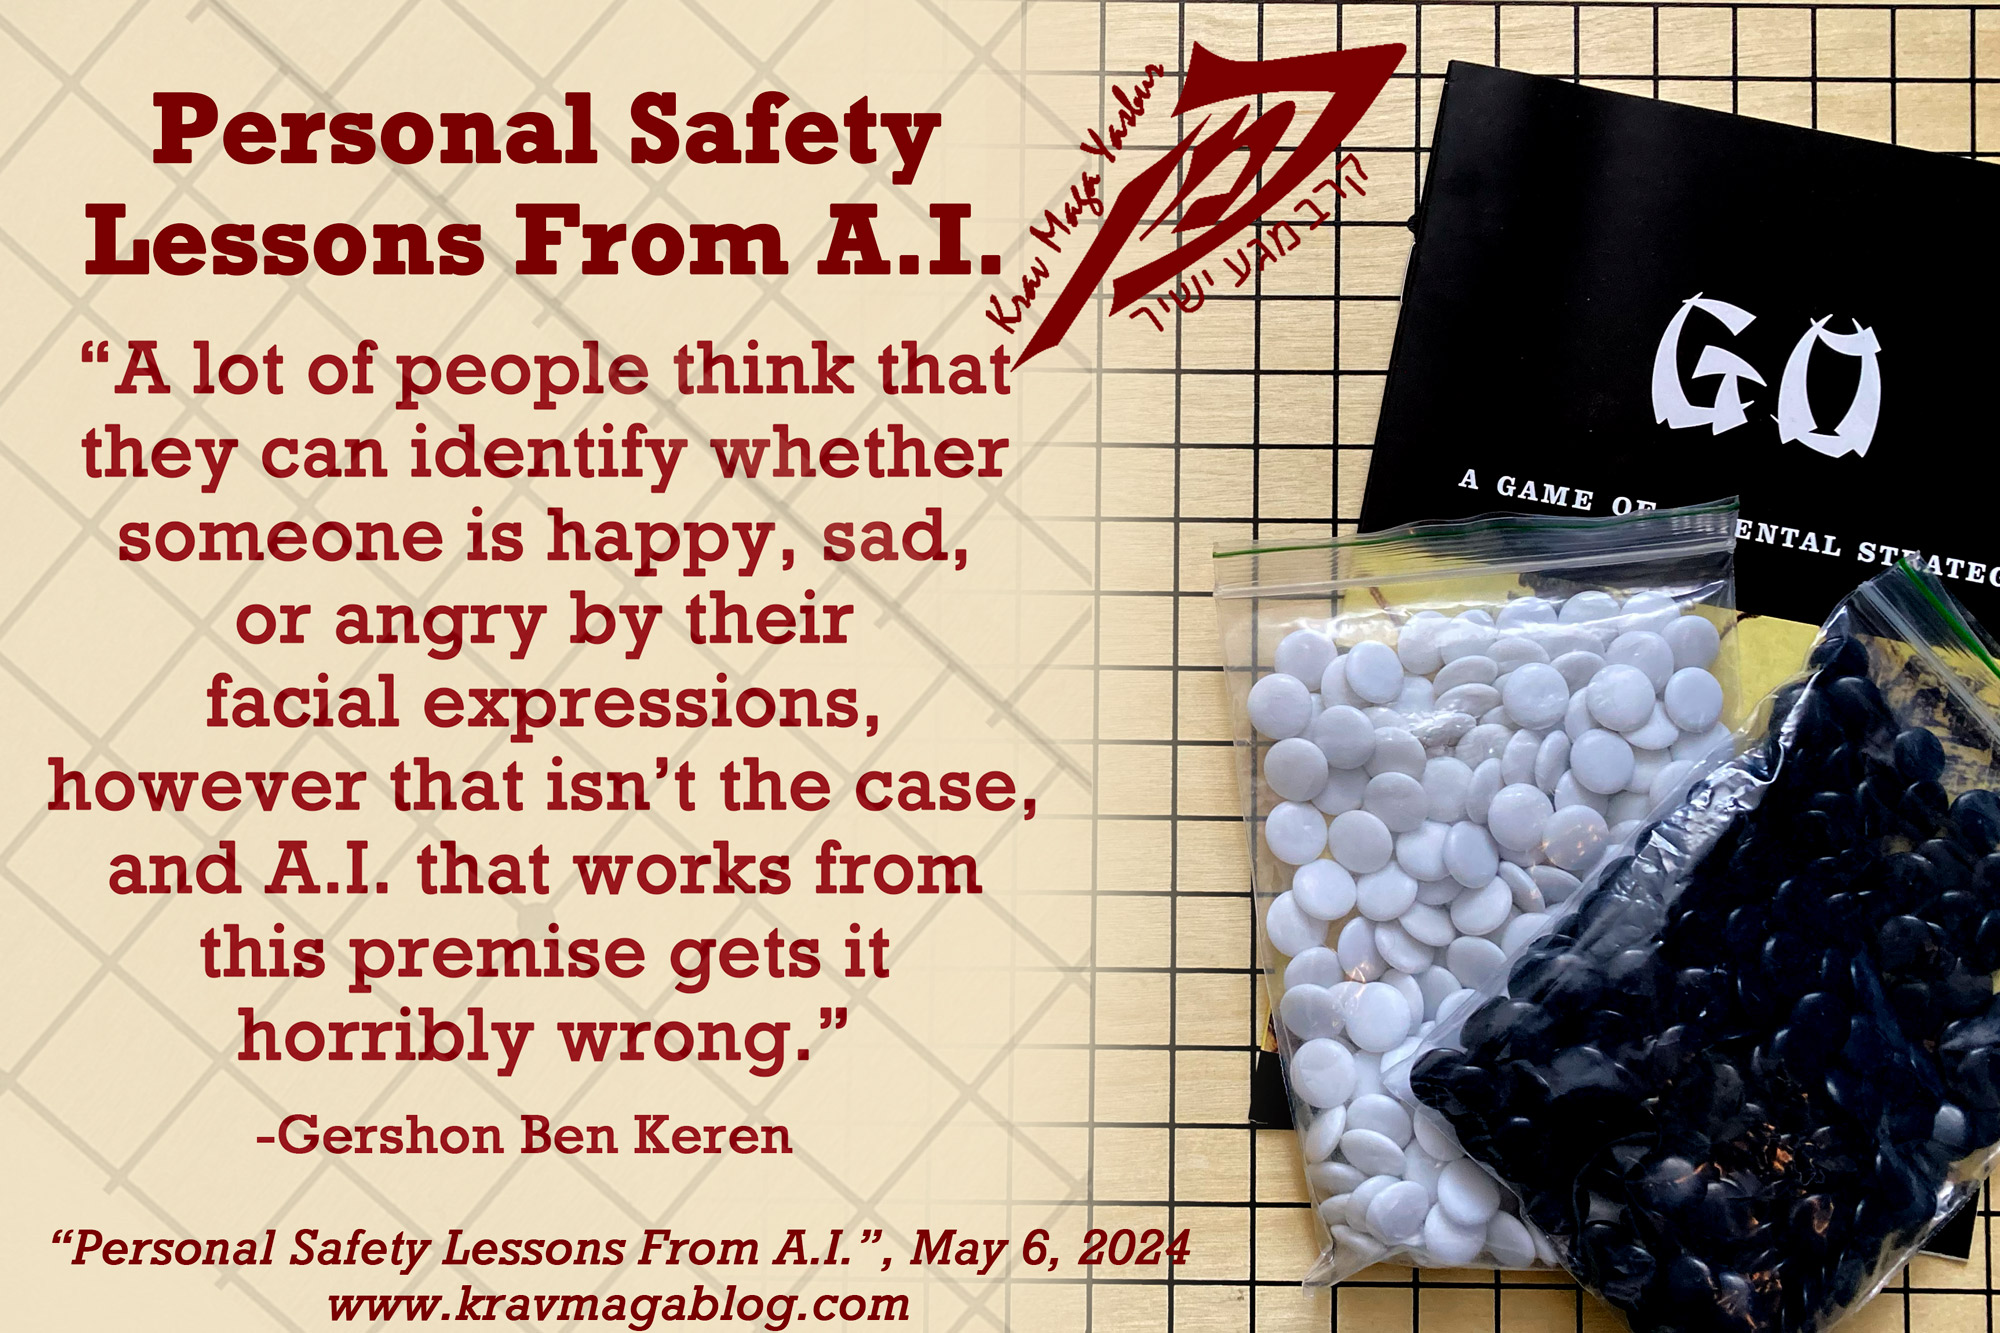 Blog About Personal Safety Lessons from A.I. (Artificial Intelligence)